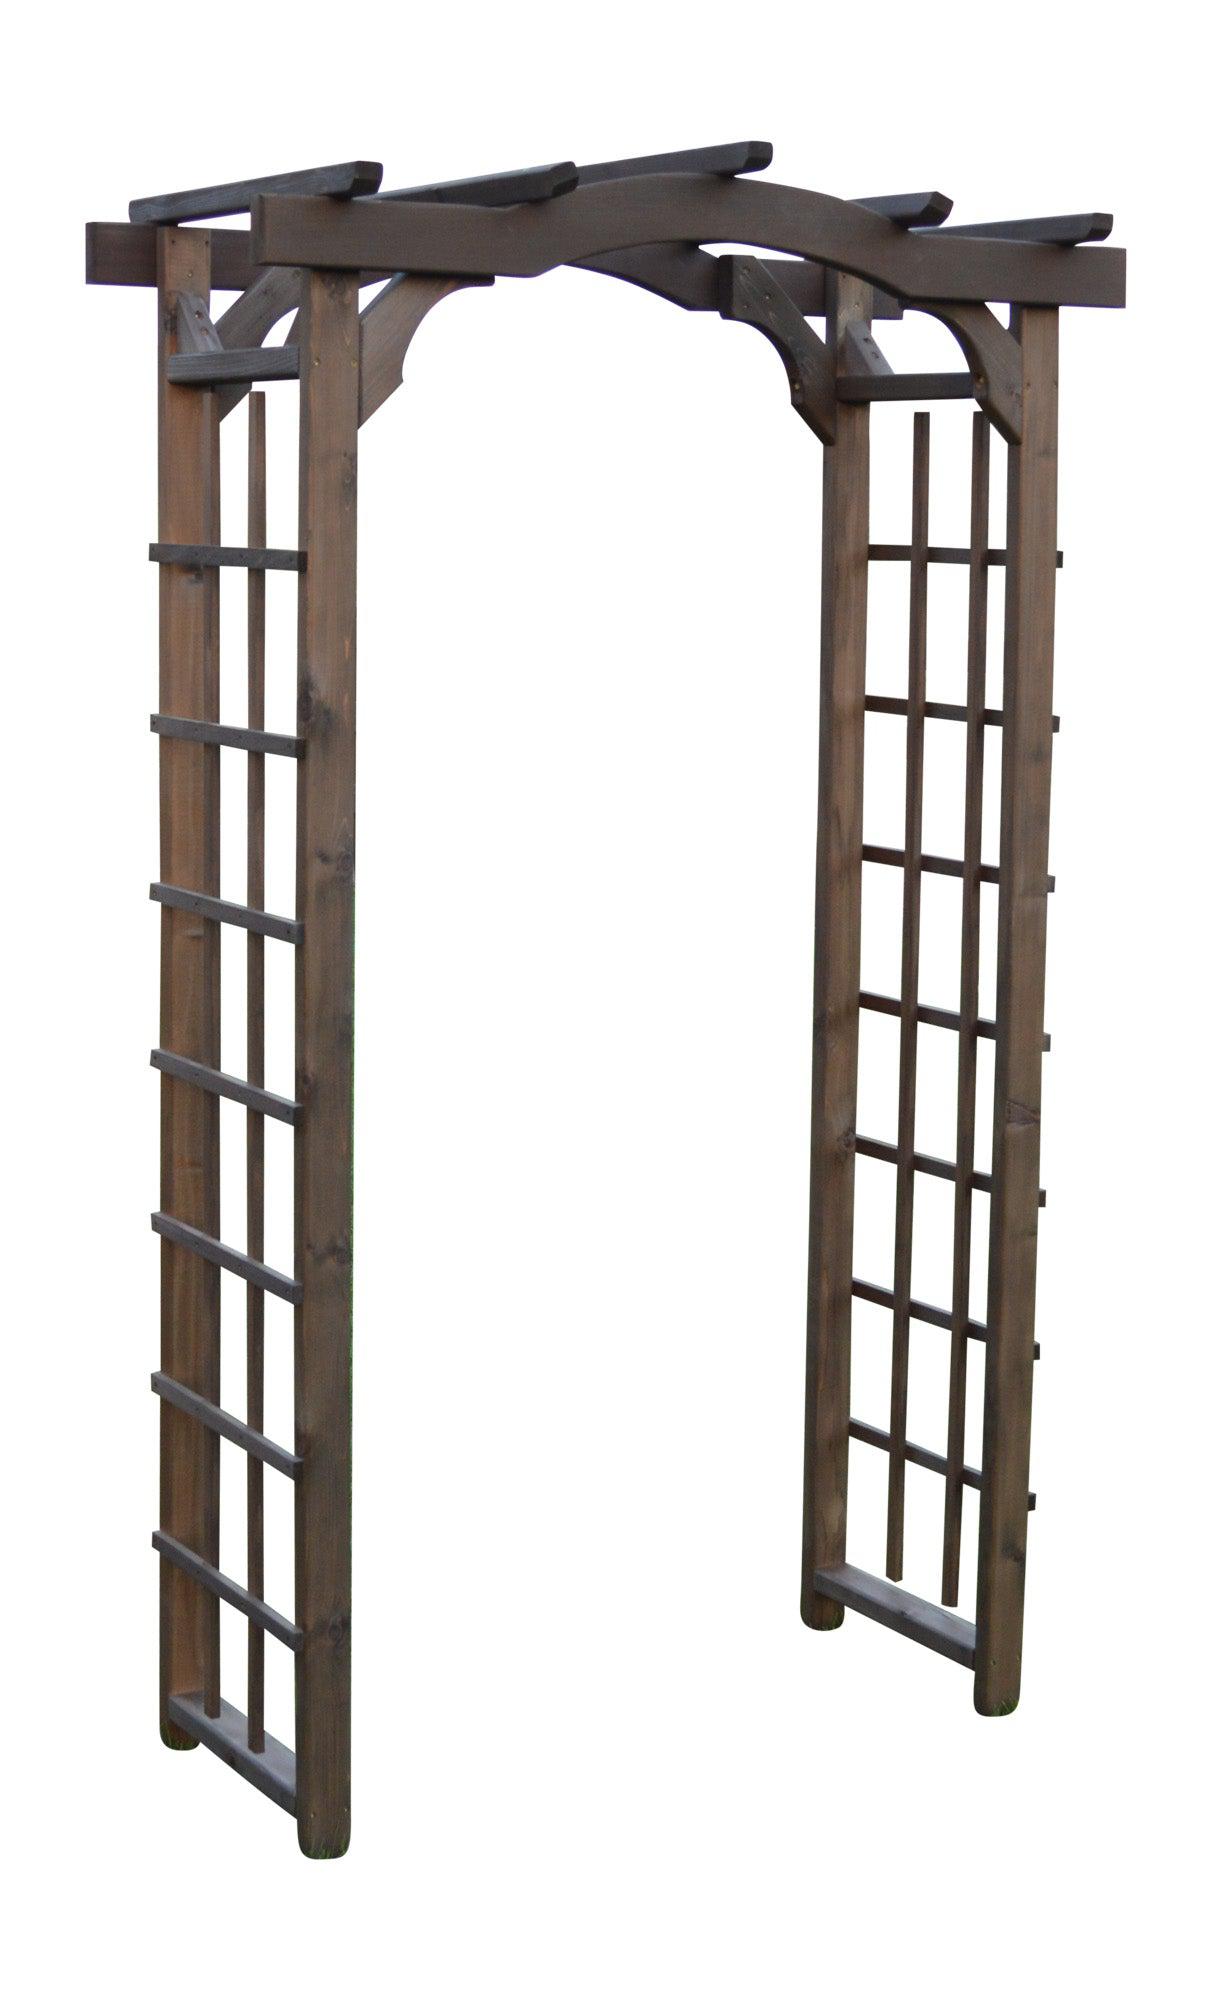 A&L FURNITURE CO. 3' Madison Pressure Treated Pine Arbor - LEAD TIME TO SHIP 10 BUSINESS DAYS